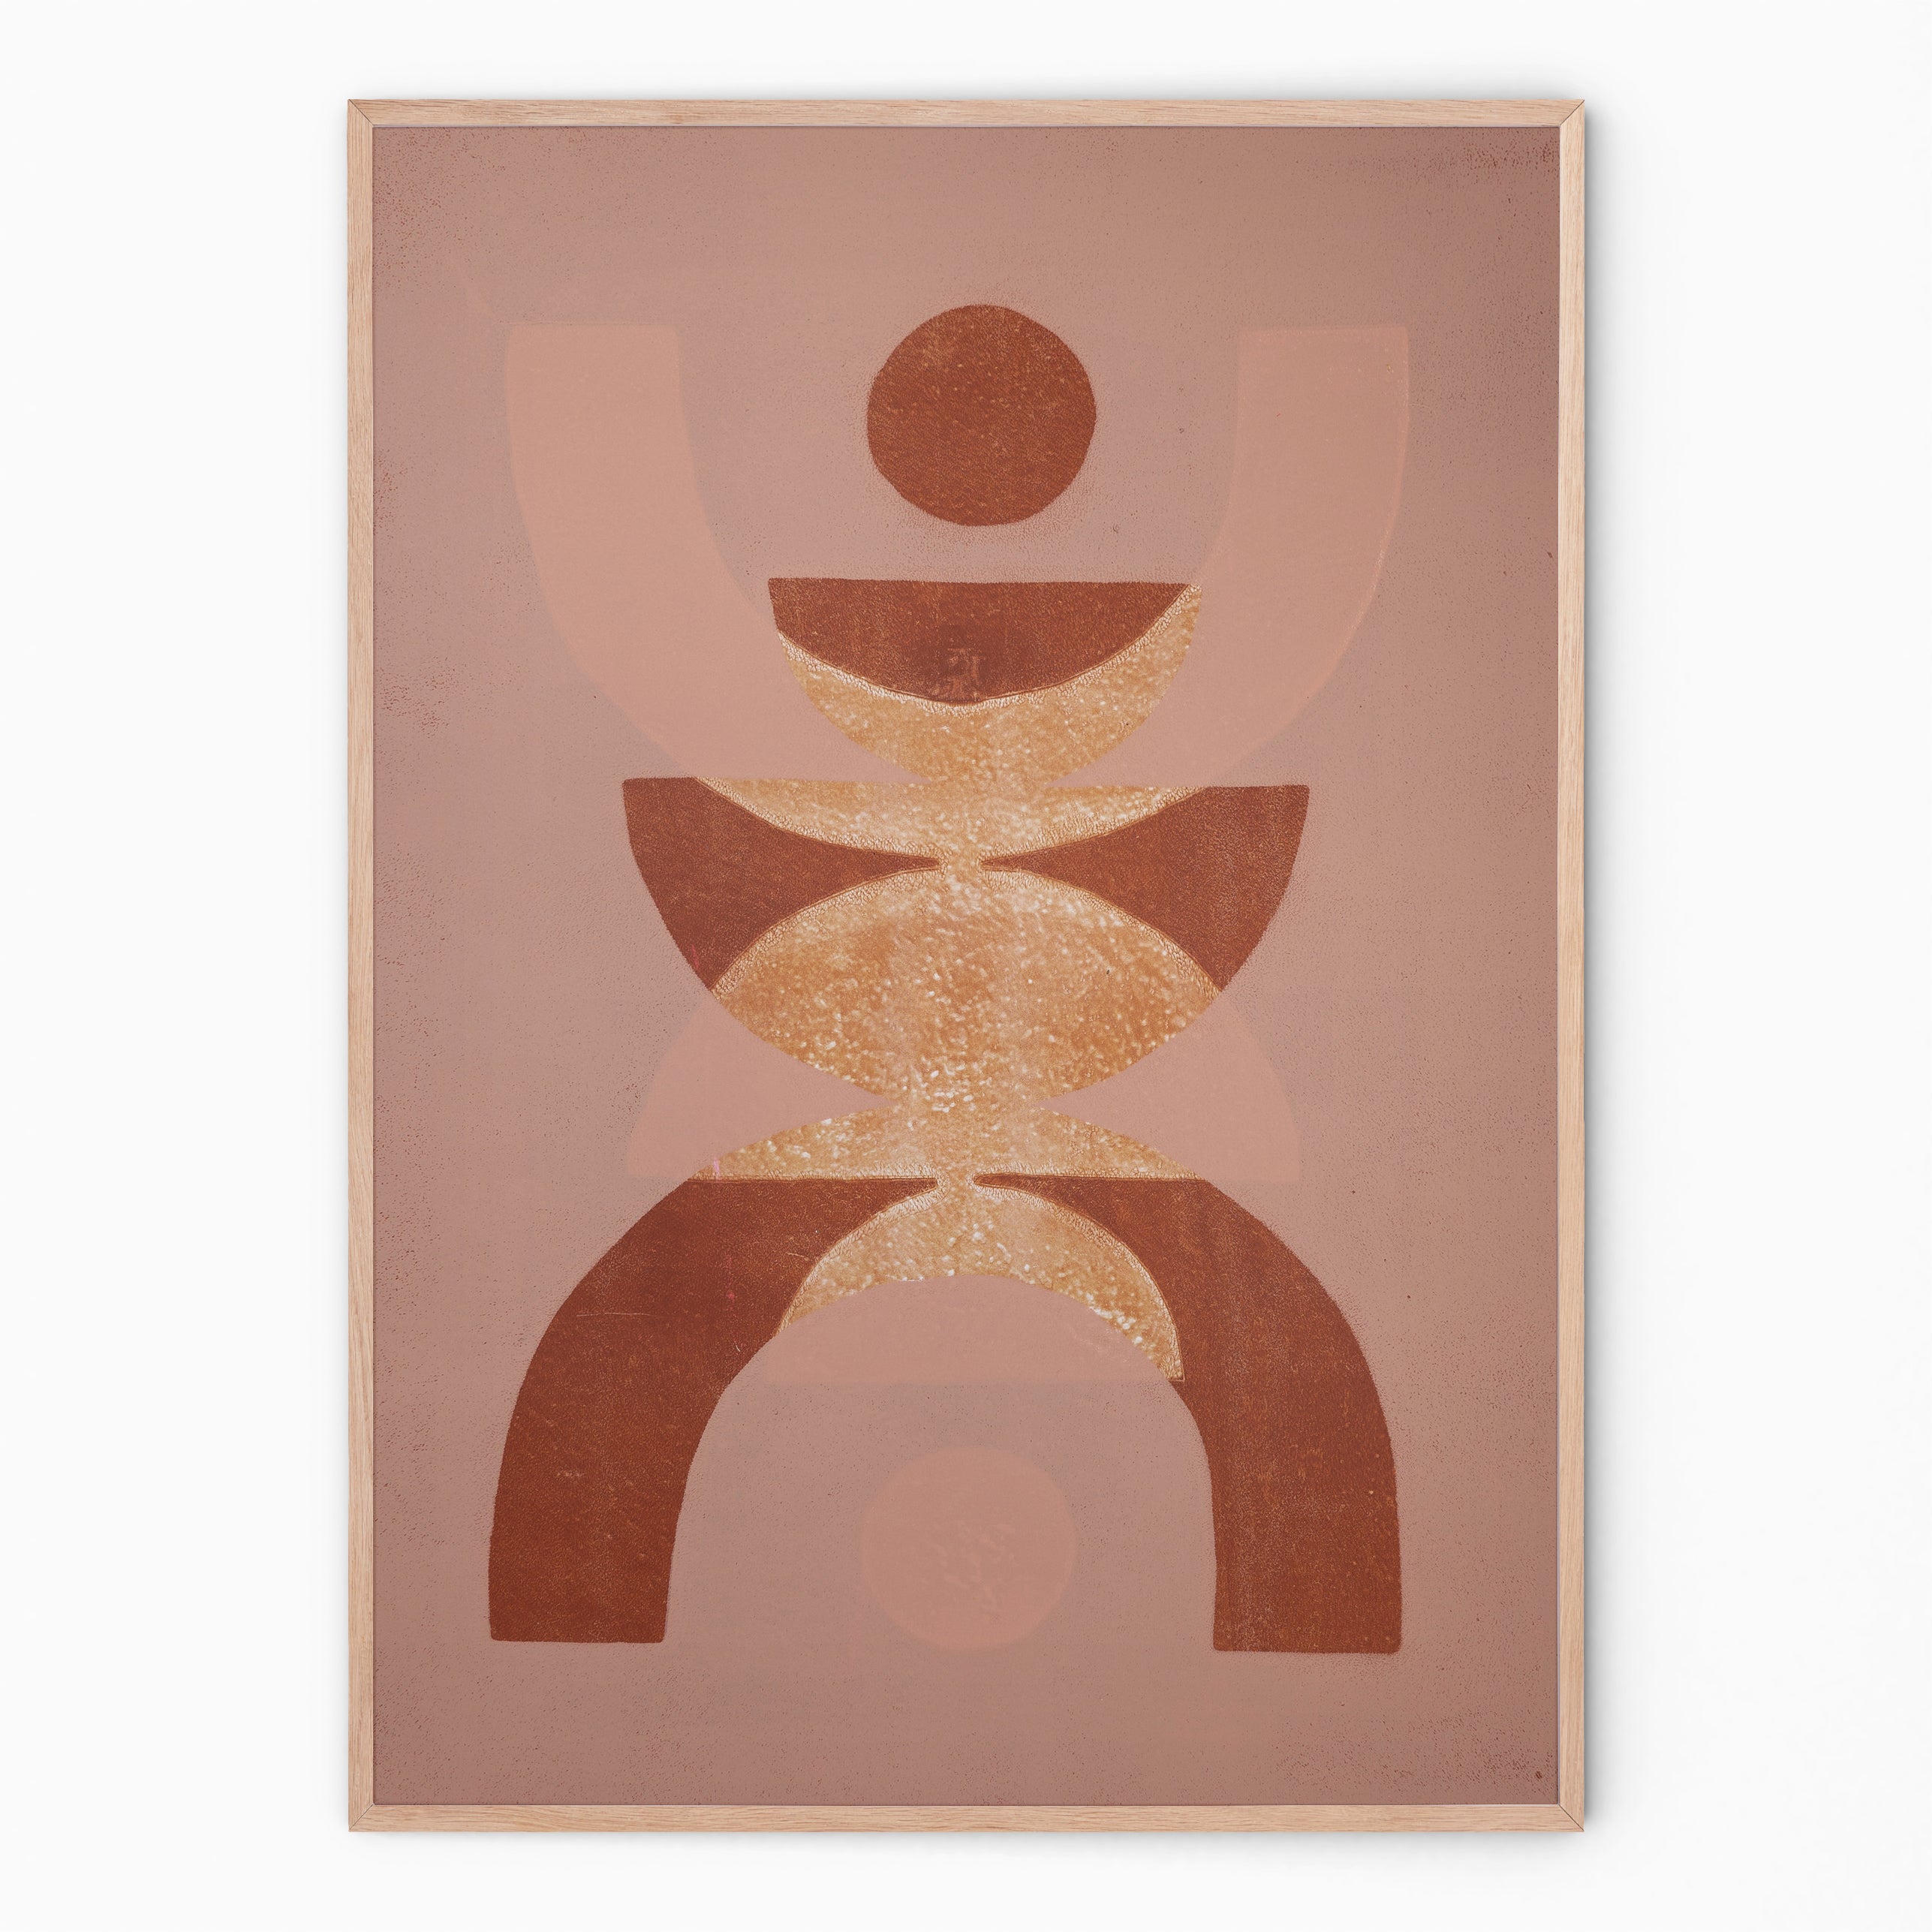 Terra and nude Abstract wall art for your gallery wall I Handmade poster Enkel Art Studio